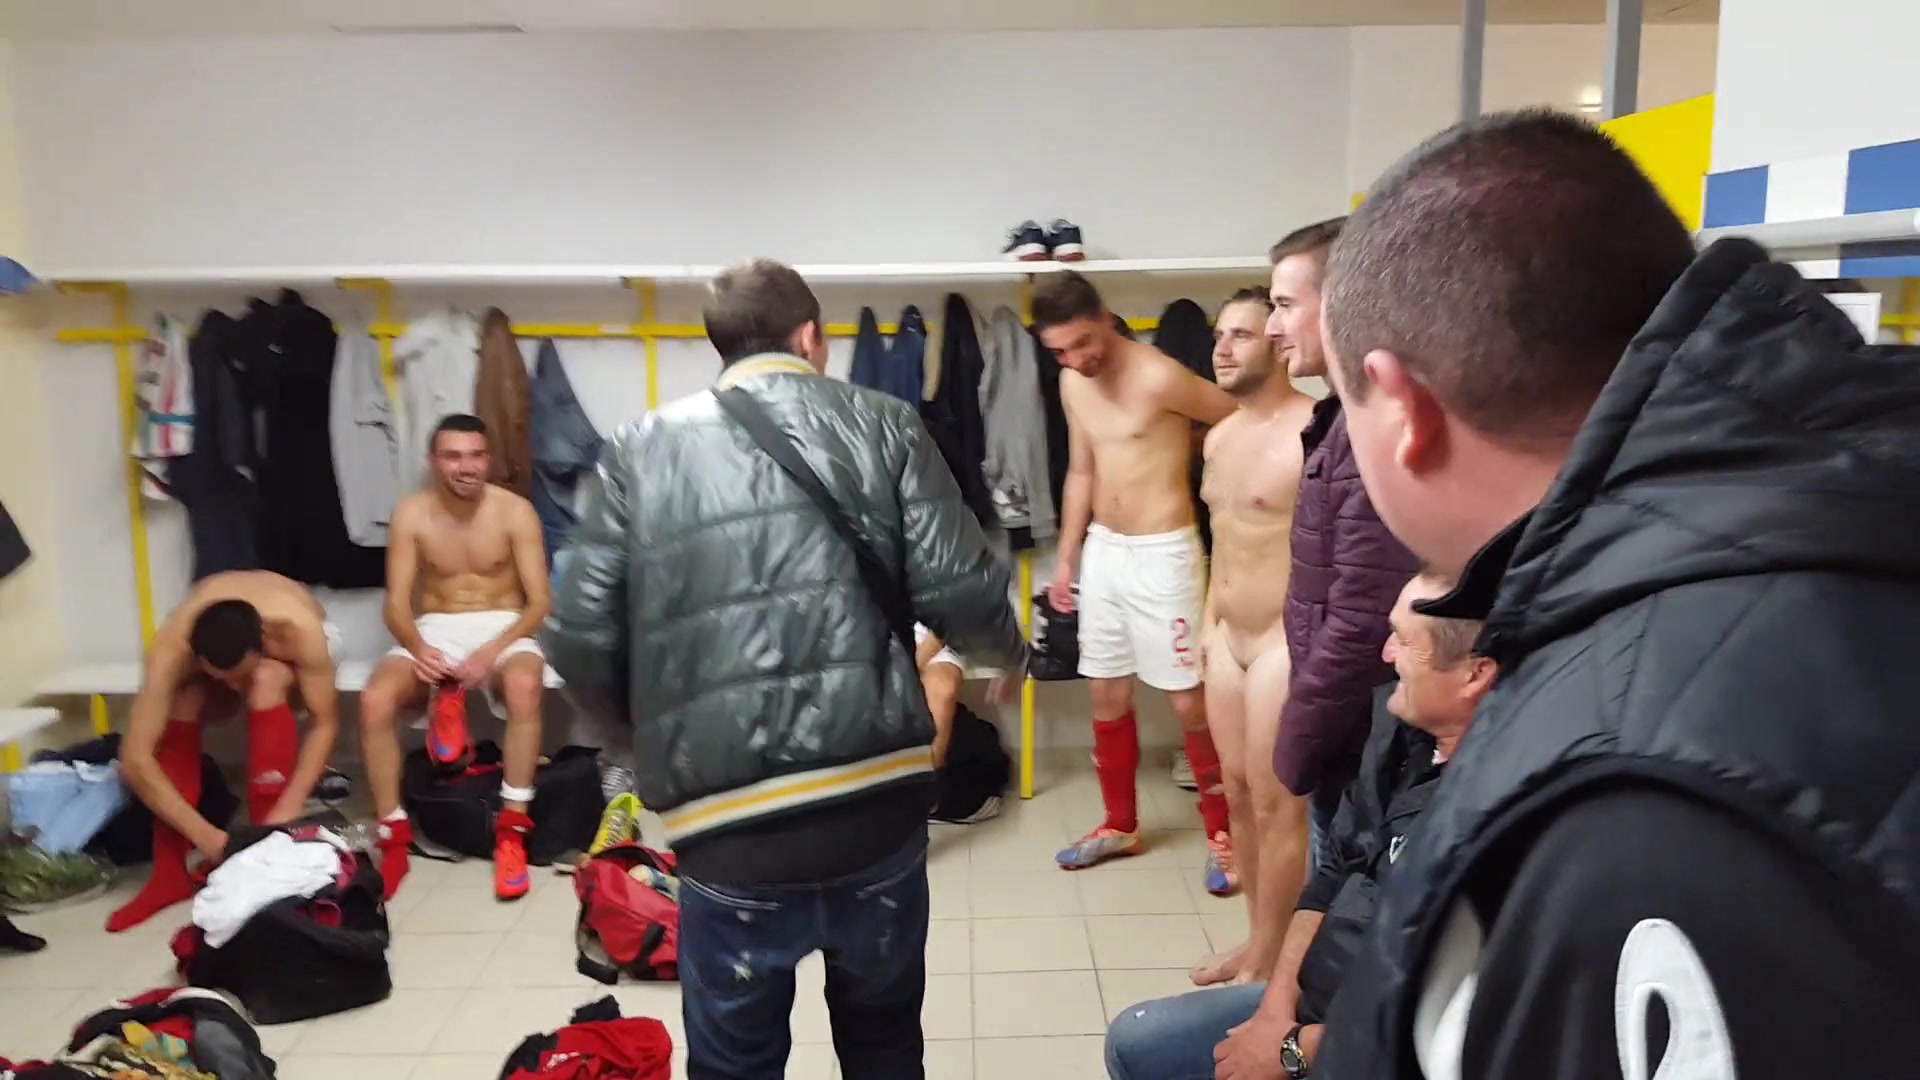 Footballers changing room naked